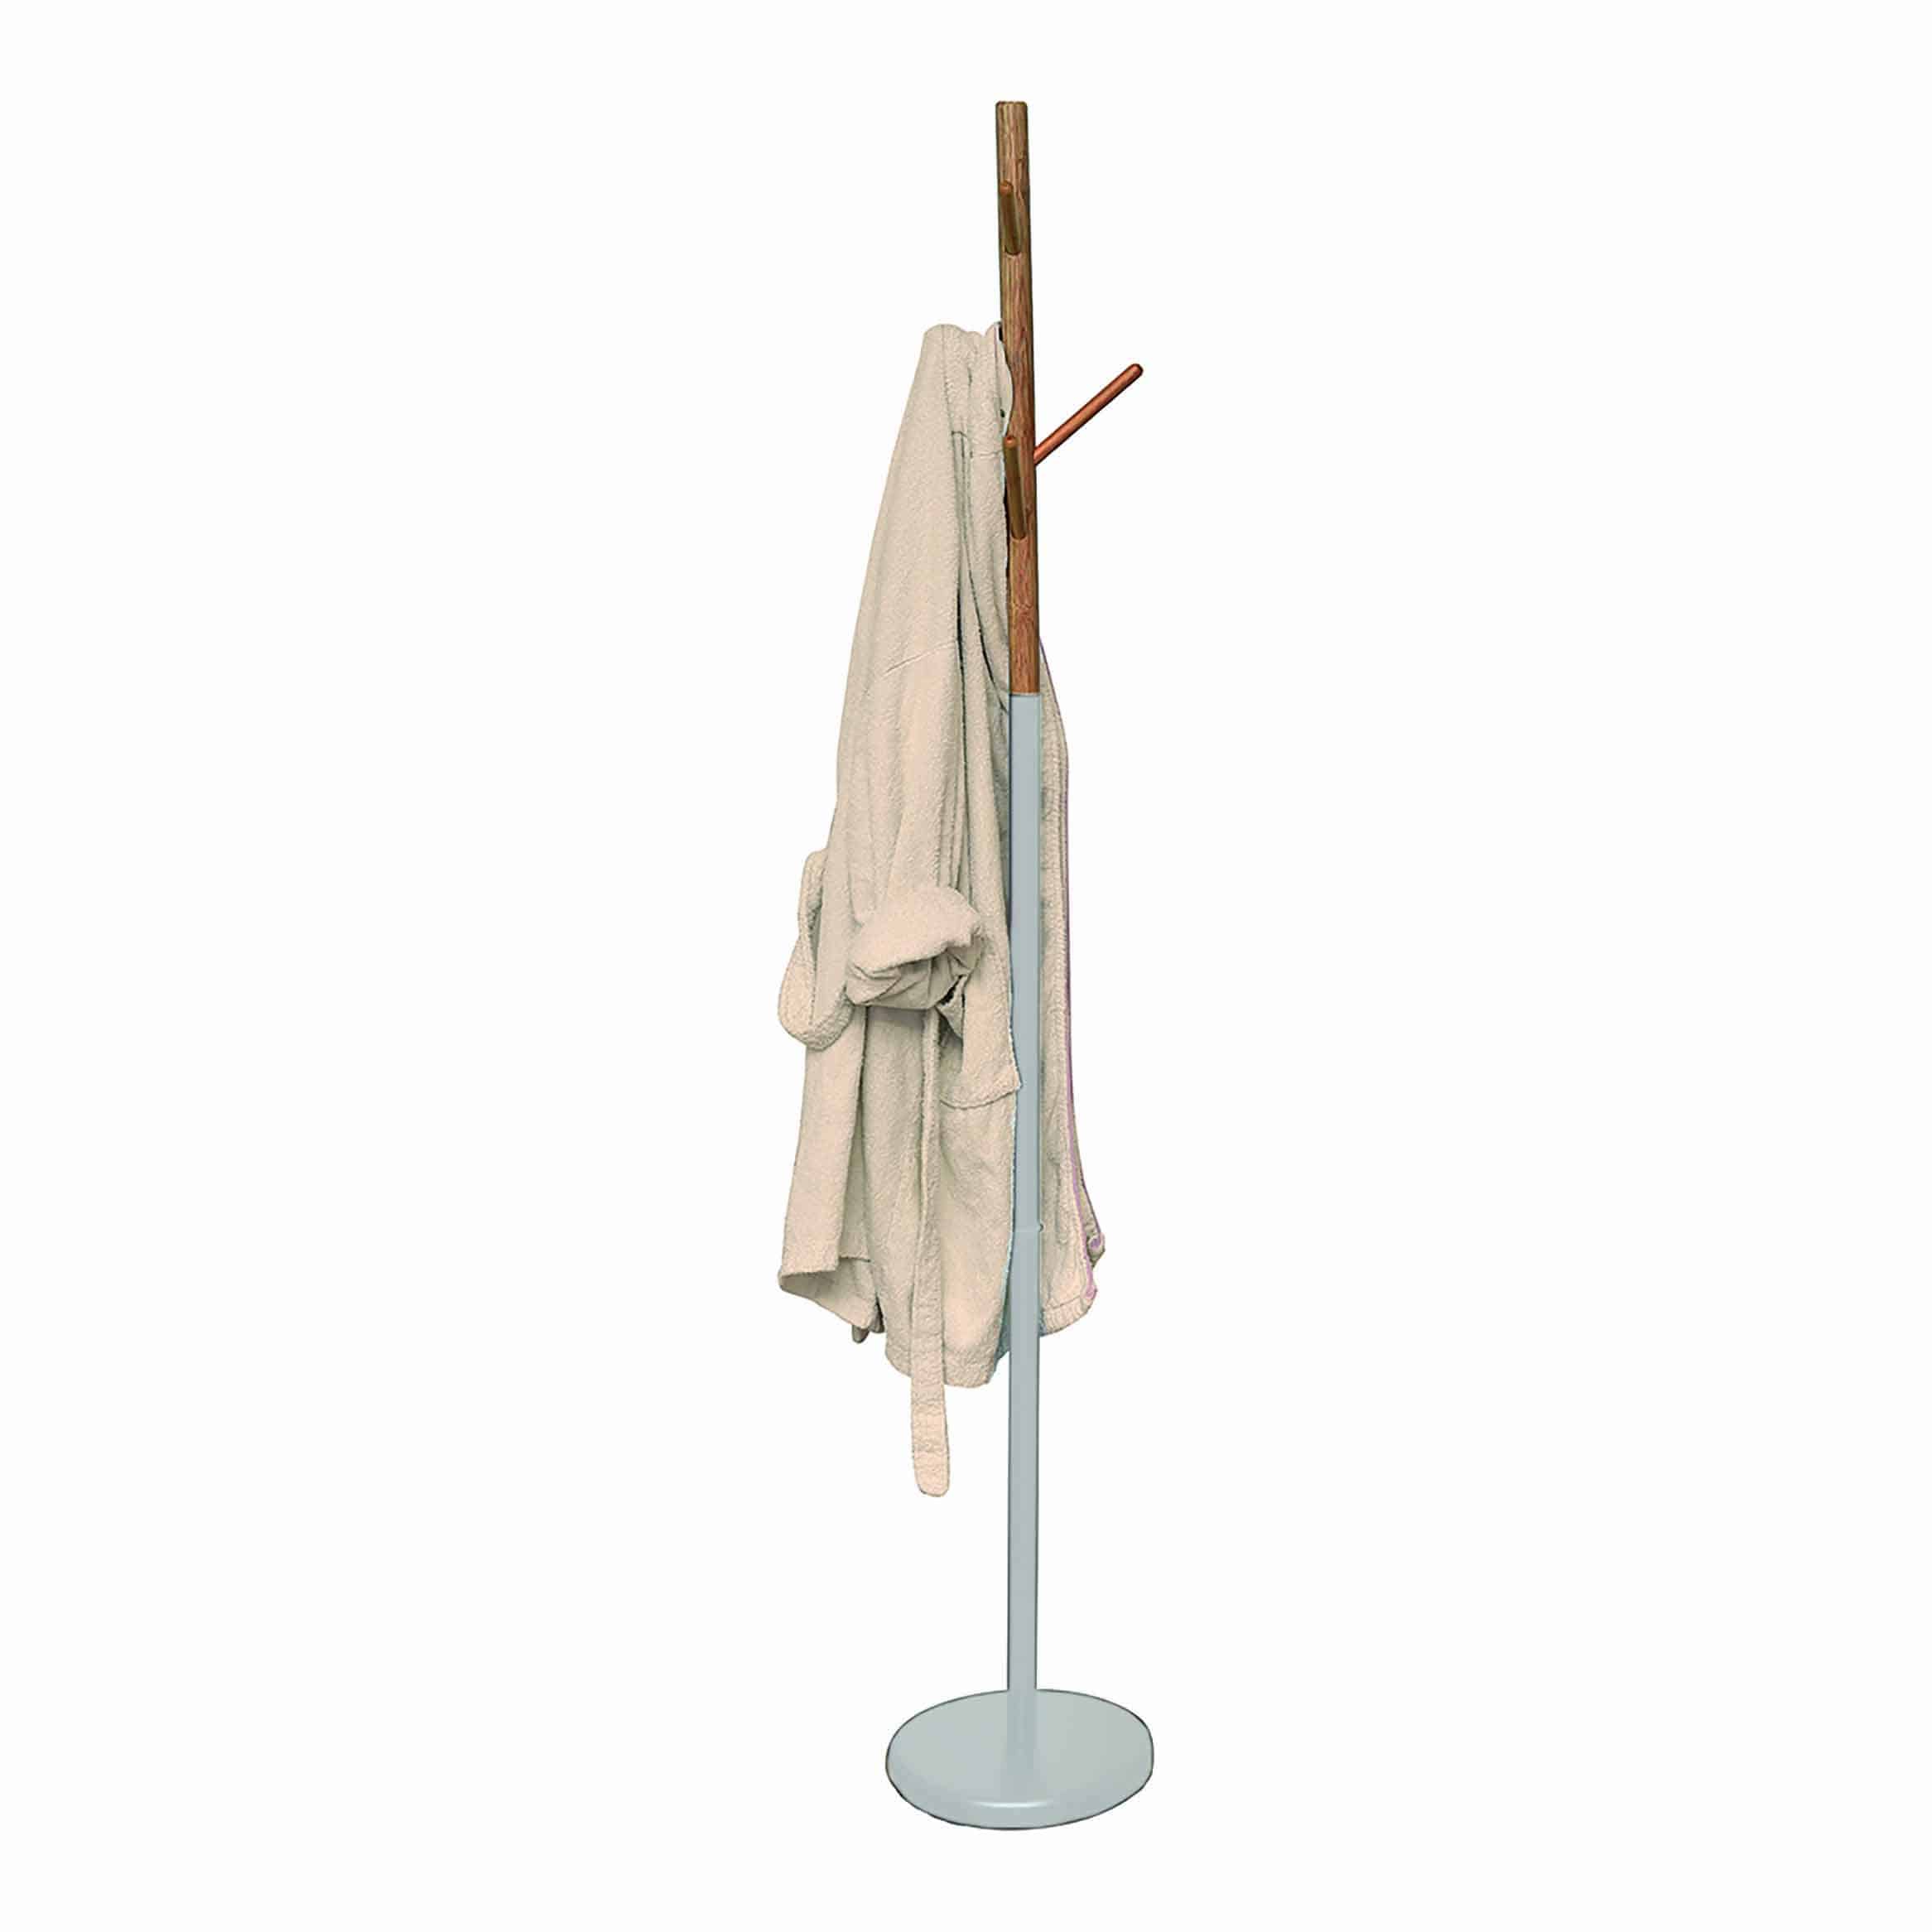 Tendance 96113237 Evideco Coat Rack Standing Hall Tree for Entryway 6 Hooks Black and Natural 69.2 H x 11.5